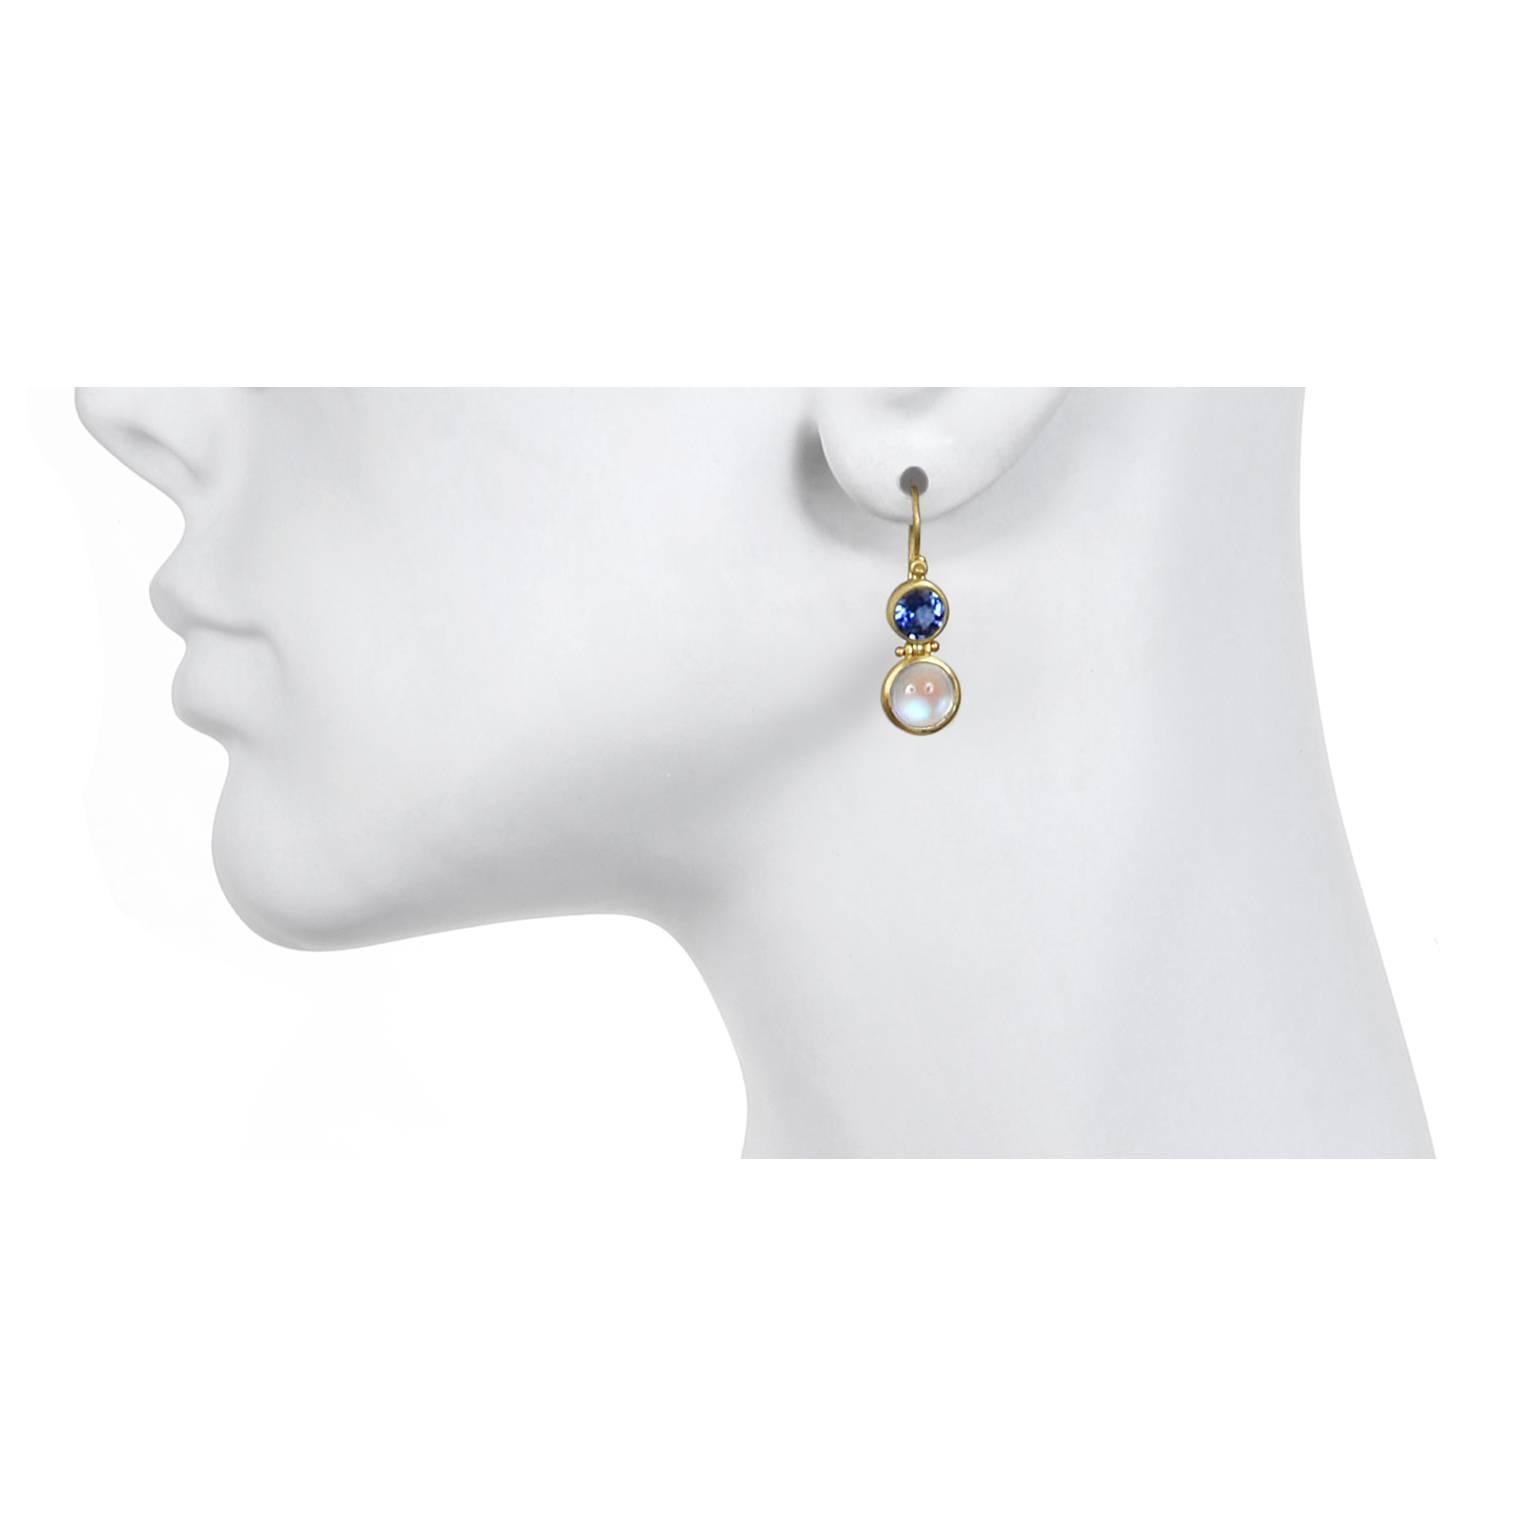 18k gold* Ceylon moonstones are bezel set with Ceylon blue sapphires to create Faye Kim's signature double hinge earrings.  French ear wires.
Length 1